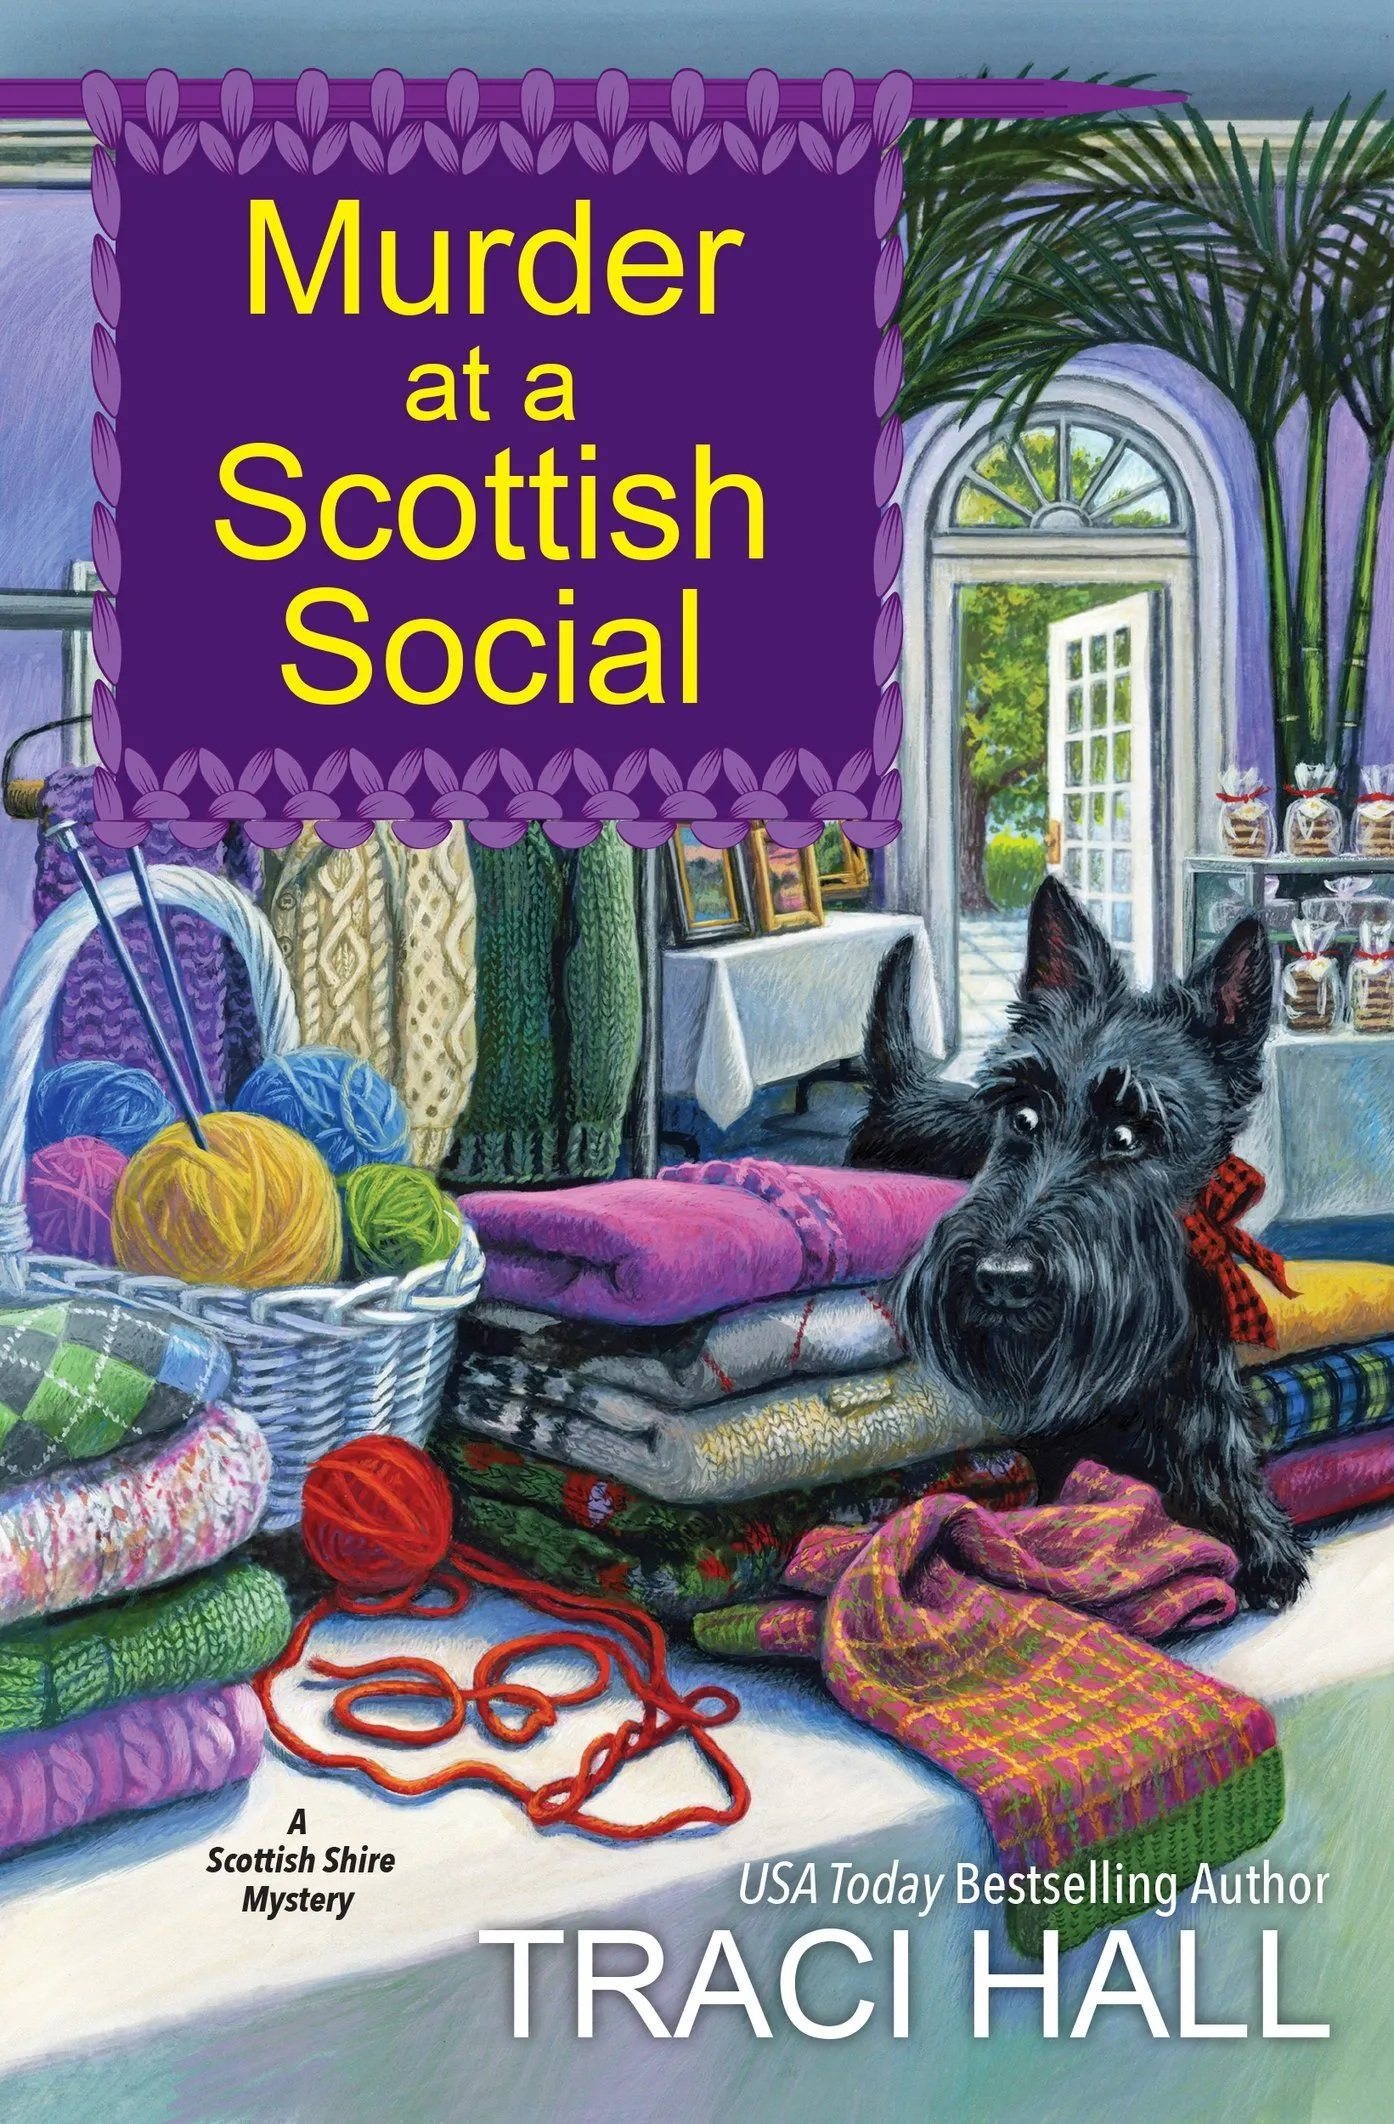 Murder at a Scottish Social (A Scottish Shire Mystery #3)